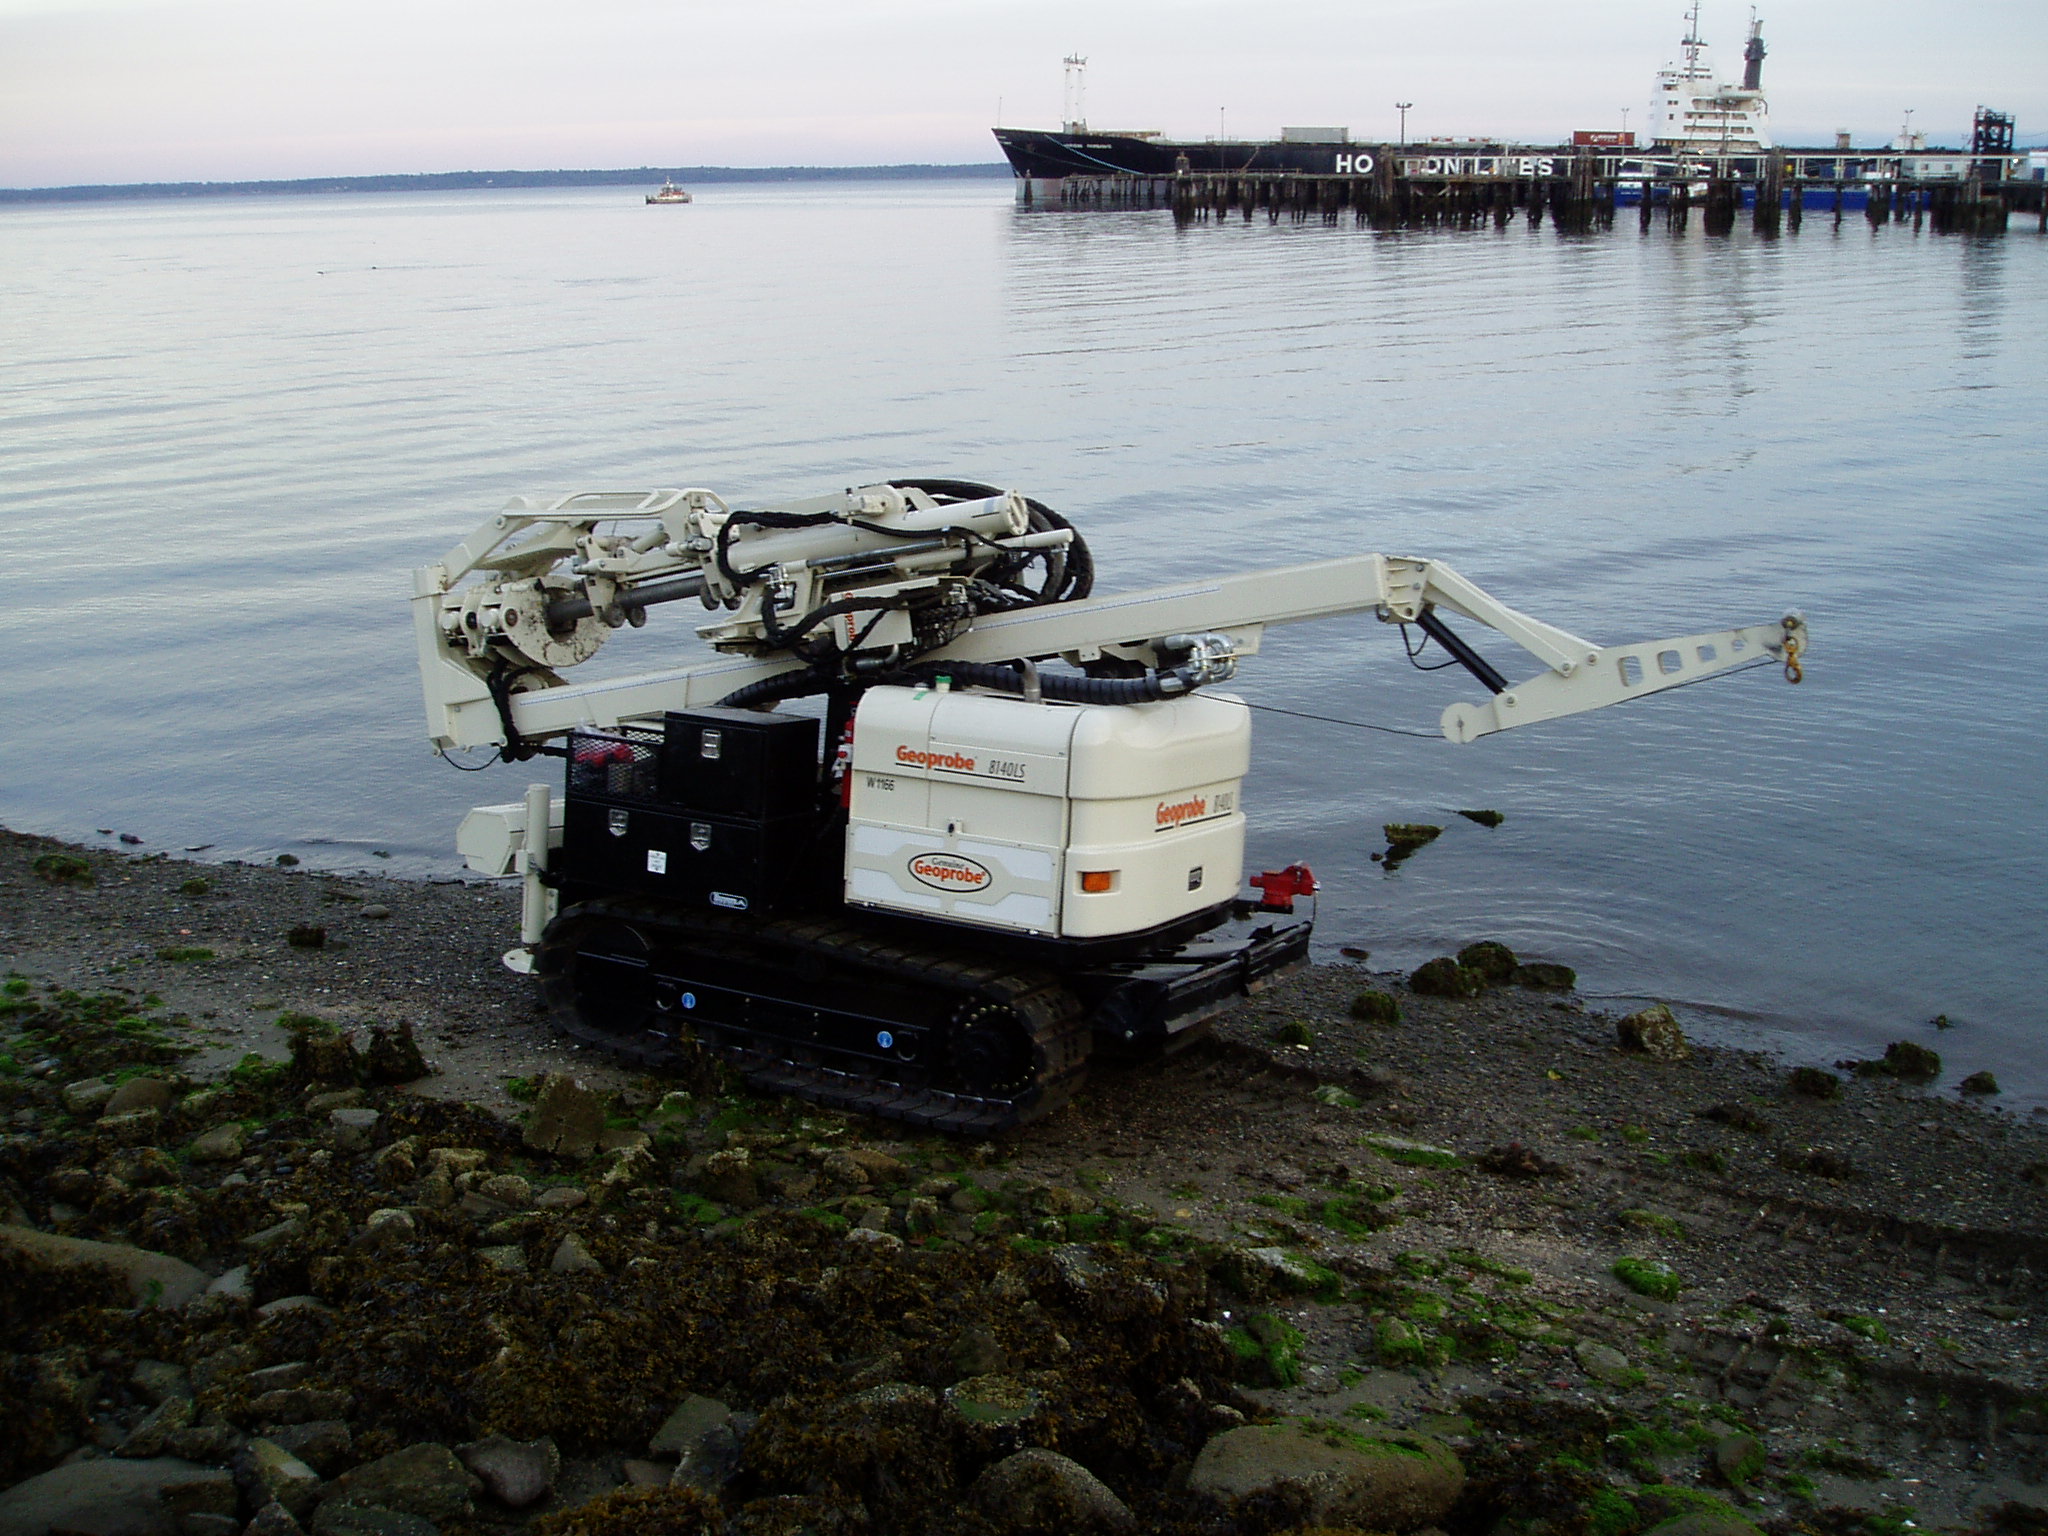 Sampling machine with arm on track treads on waterfront